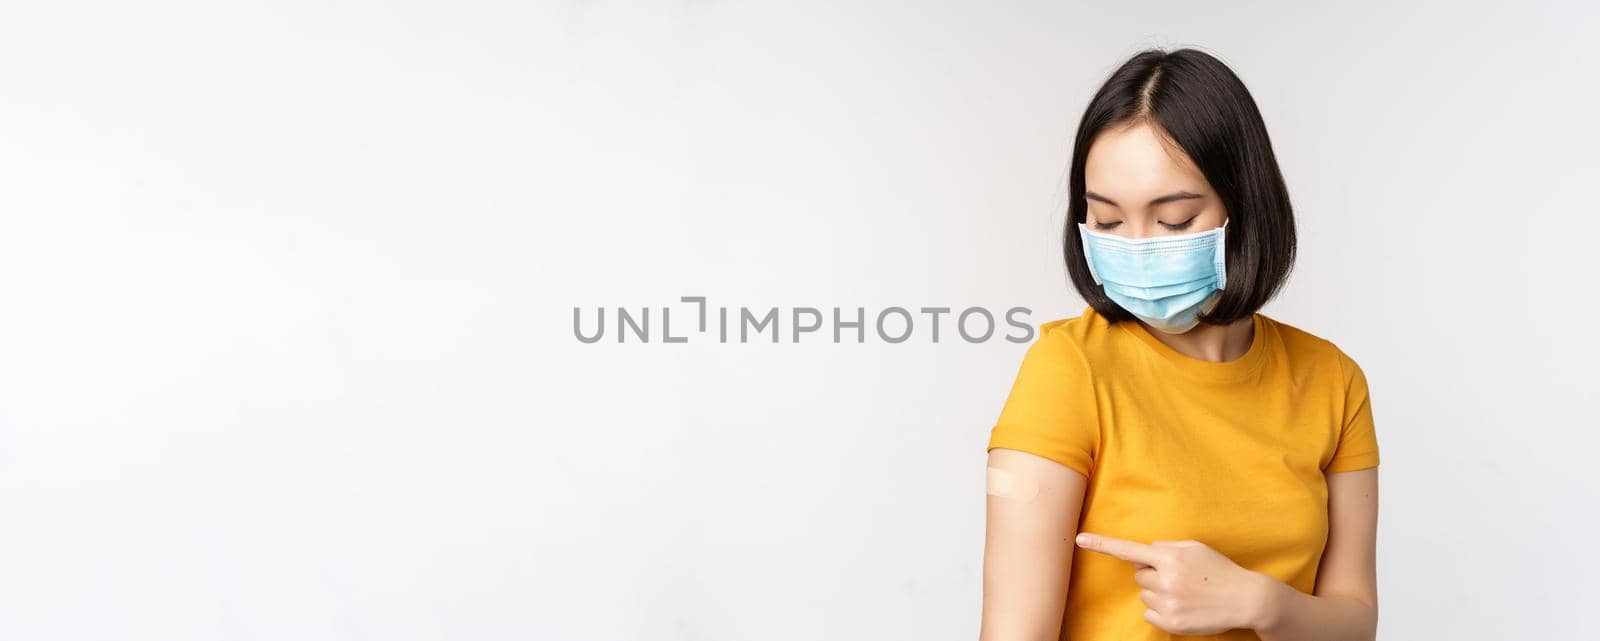 Covid-19, vaccination and healthcare concept. Cute asian girl in medical face mask, showing band aid after coronavirus vaccination, standing over white background.